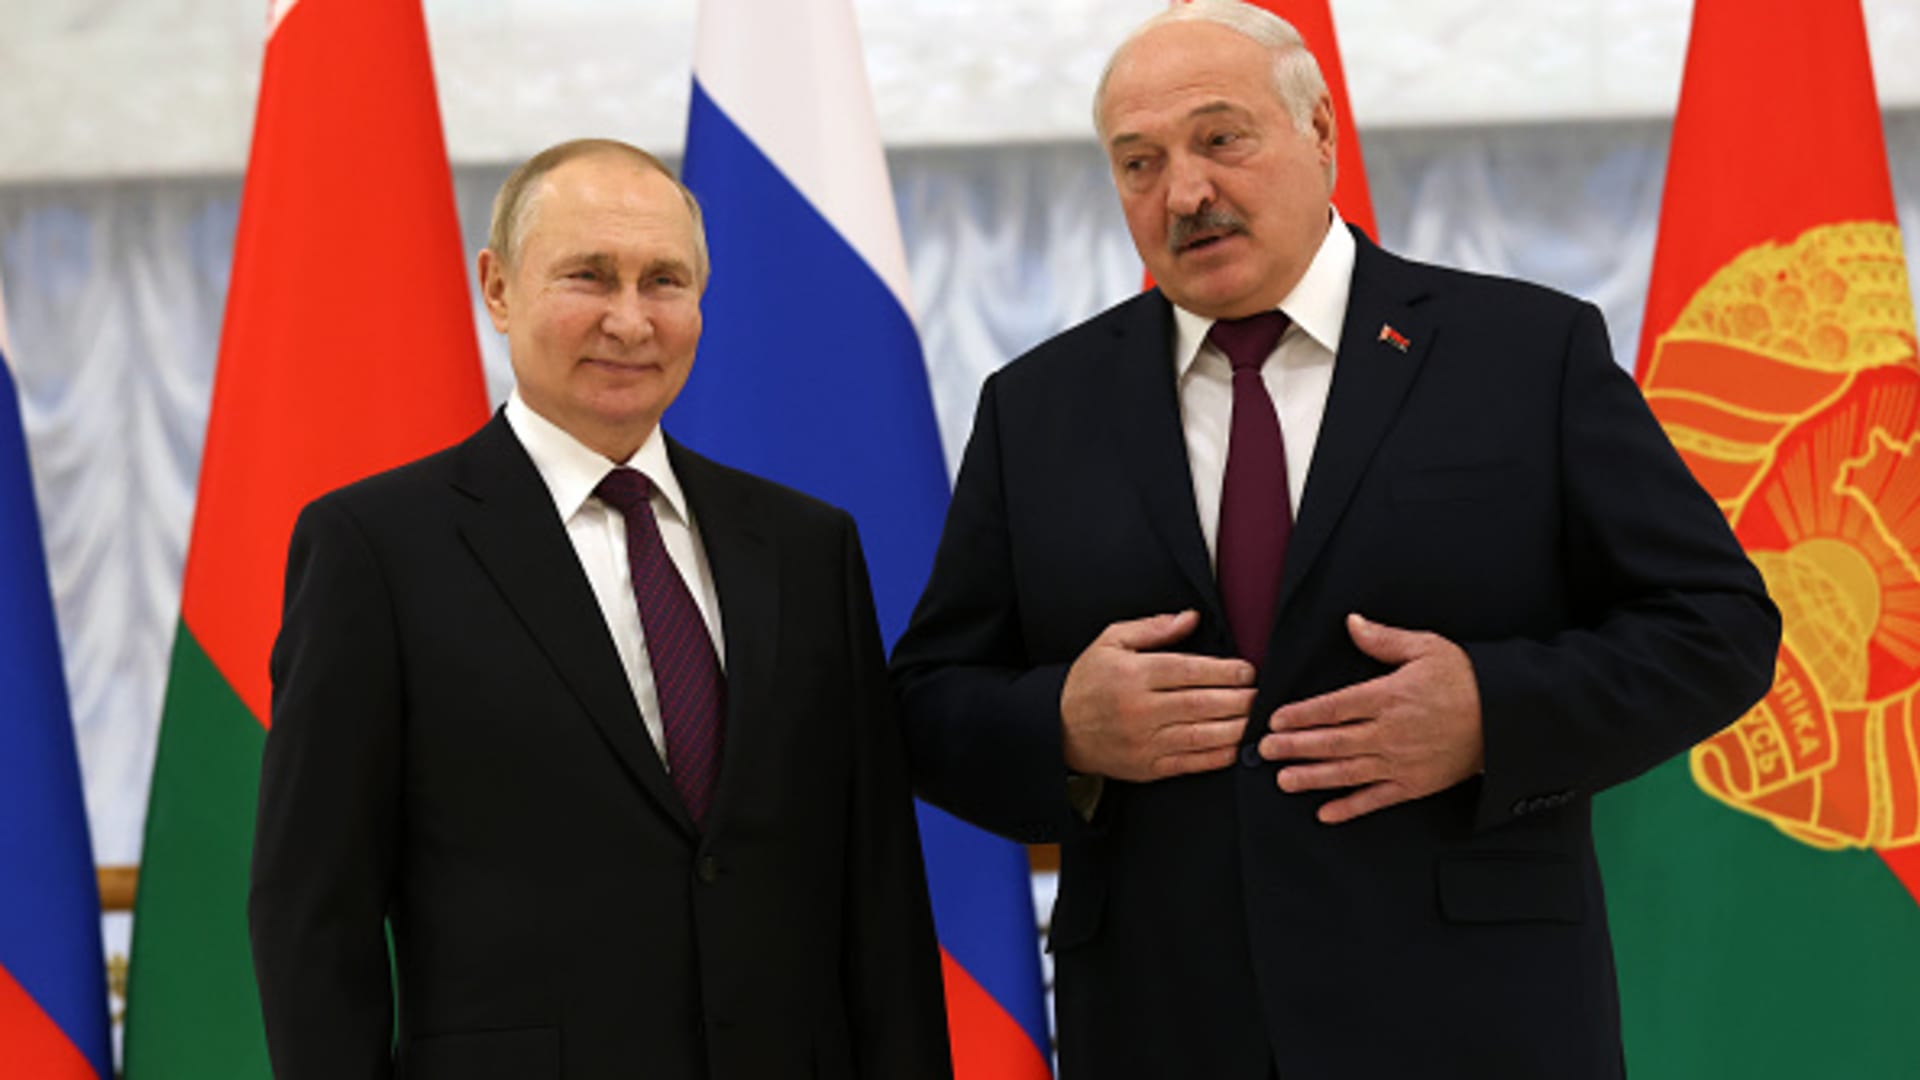 MINSK, BELARUS - DECEMBER 19: (RUSSIA OUT) Russian President Vladimir Putin (L) and Belarussian President Alexander Lukashenko (R) seen during the welcoming ceremony at the Palace of Independence on December 19, 2022, in Minsk, Belarus.